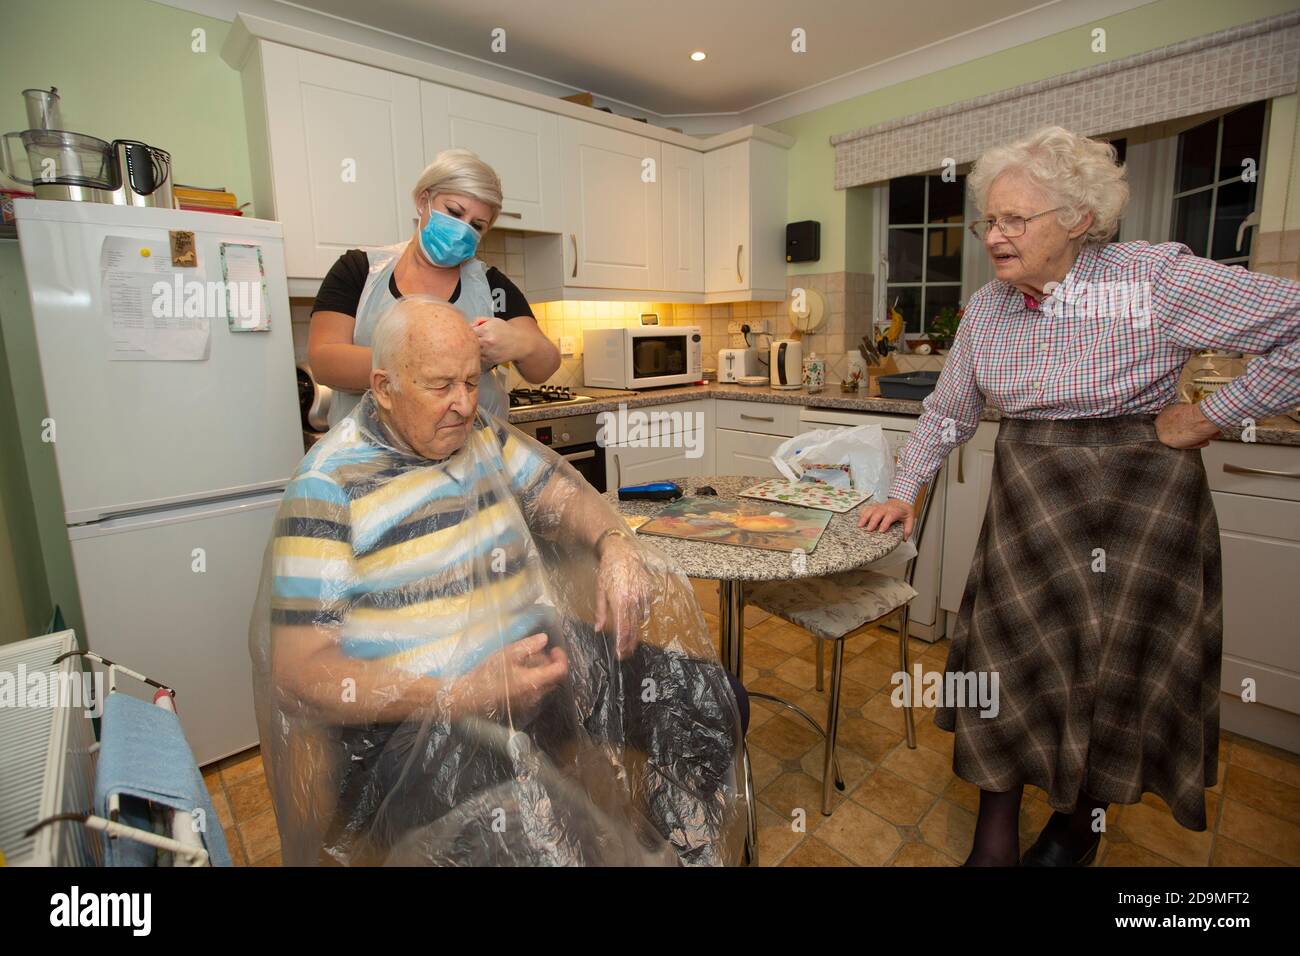 Elderly couple in their 80's at their home having tea served by a social care worker during the coronavirus pandemic lockdown, England, United Kingdom Stock Photo